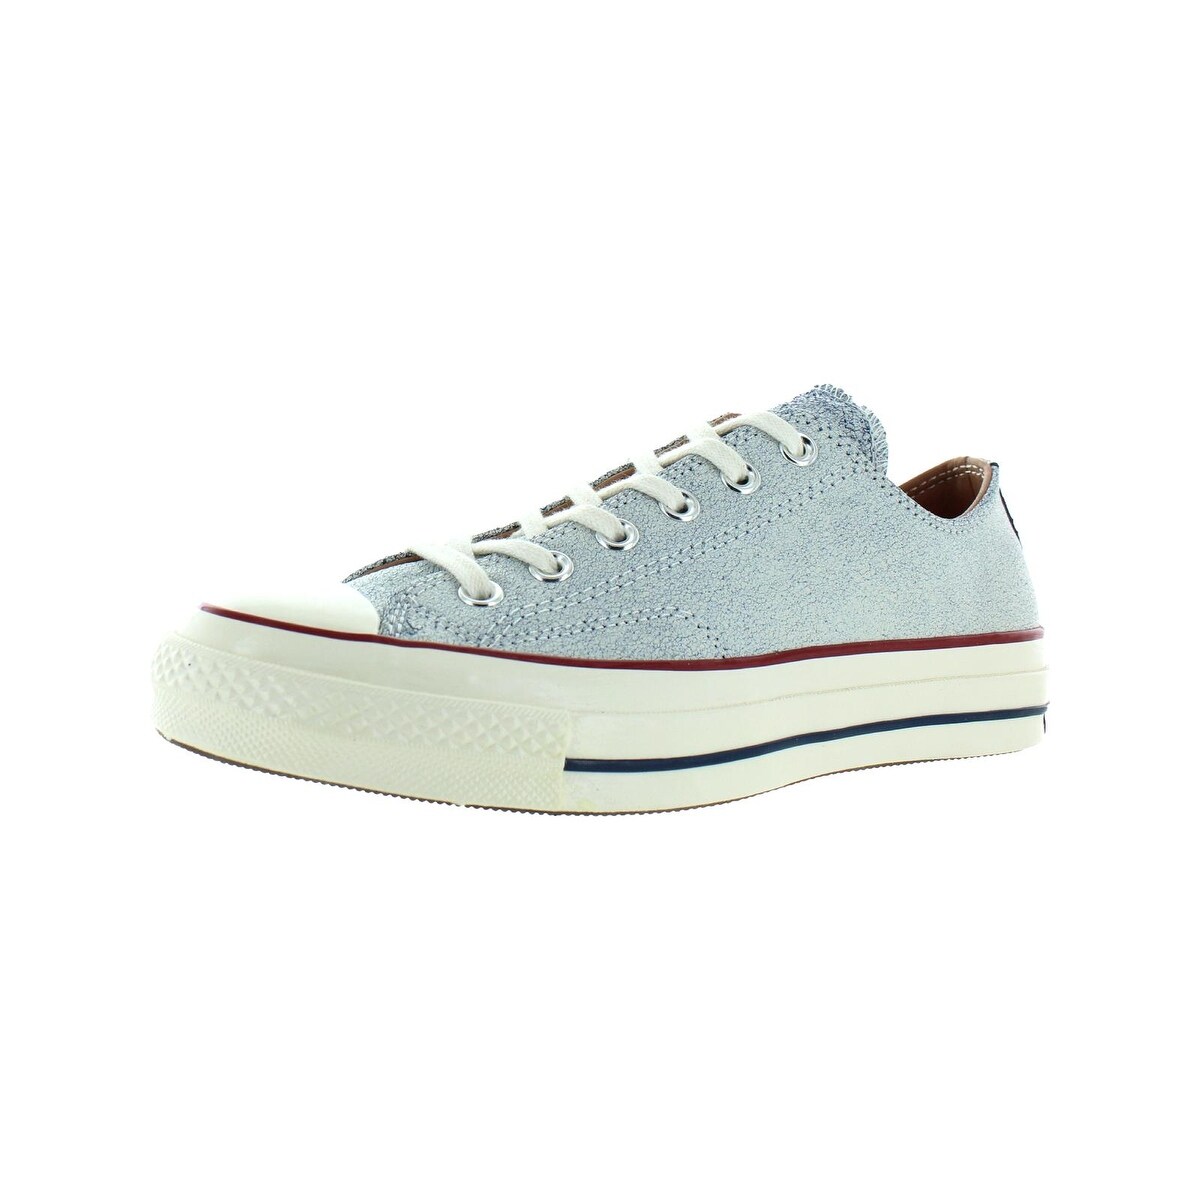 Shop Converse Mens CTAS '70 OX EGR Fashion Sneakers Low Top Lifestyle -  Free Shipping Today - Overstock - 30630580